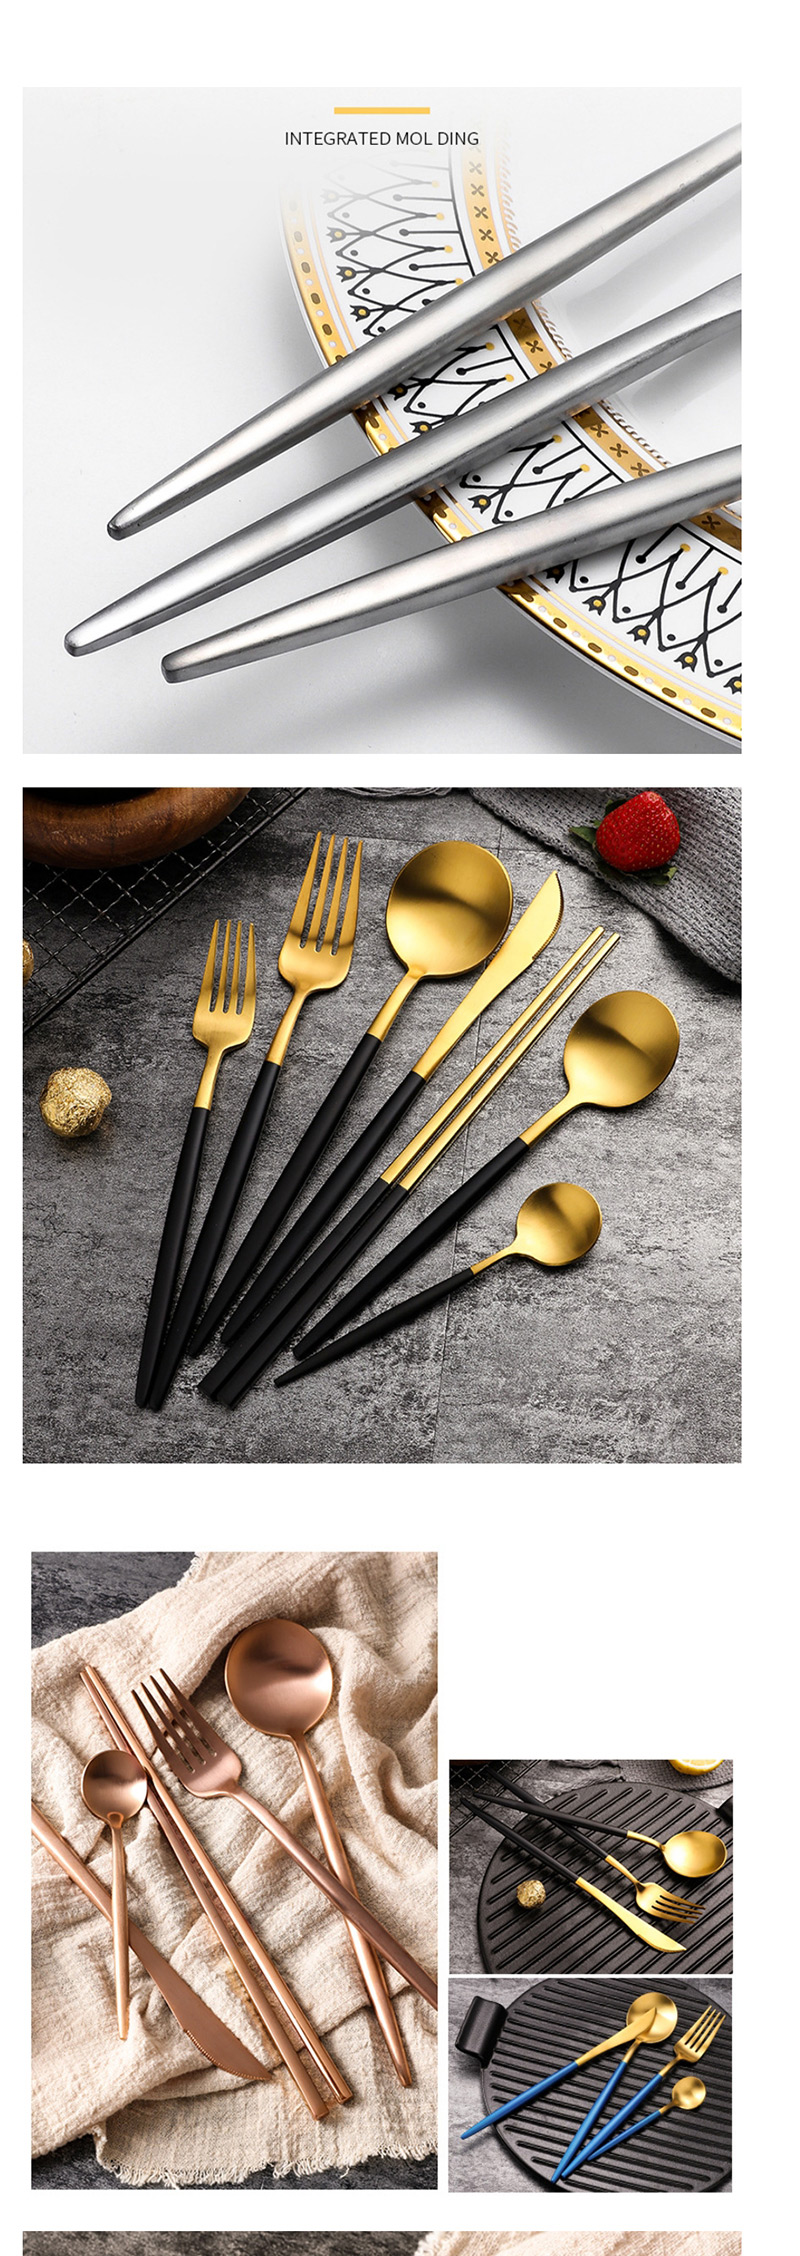 Fashion 4 Sets Of Gold (cutlery Spoon + Chopsticks) 304 Stainless Steel Cutlery Cutlery Set,Kitchen